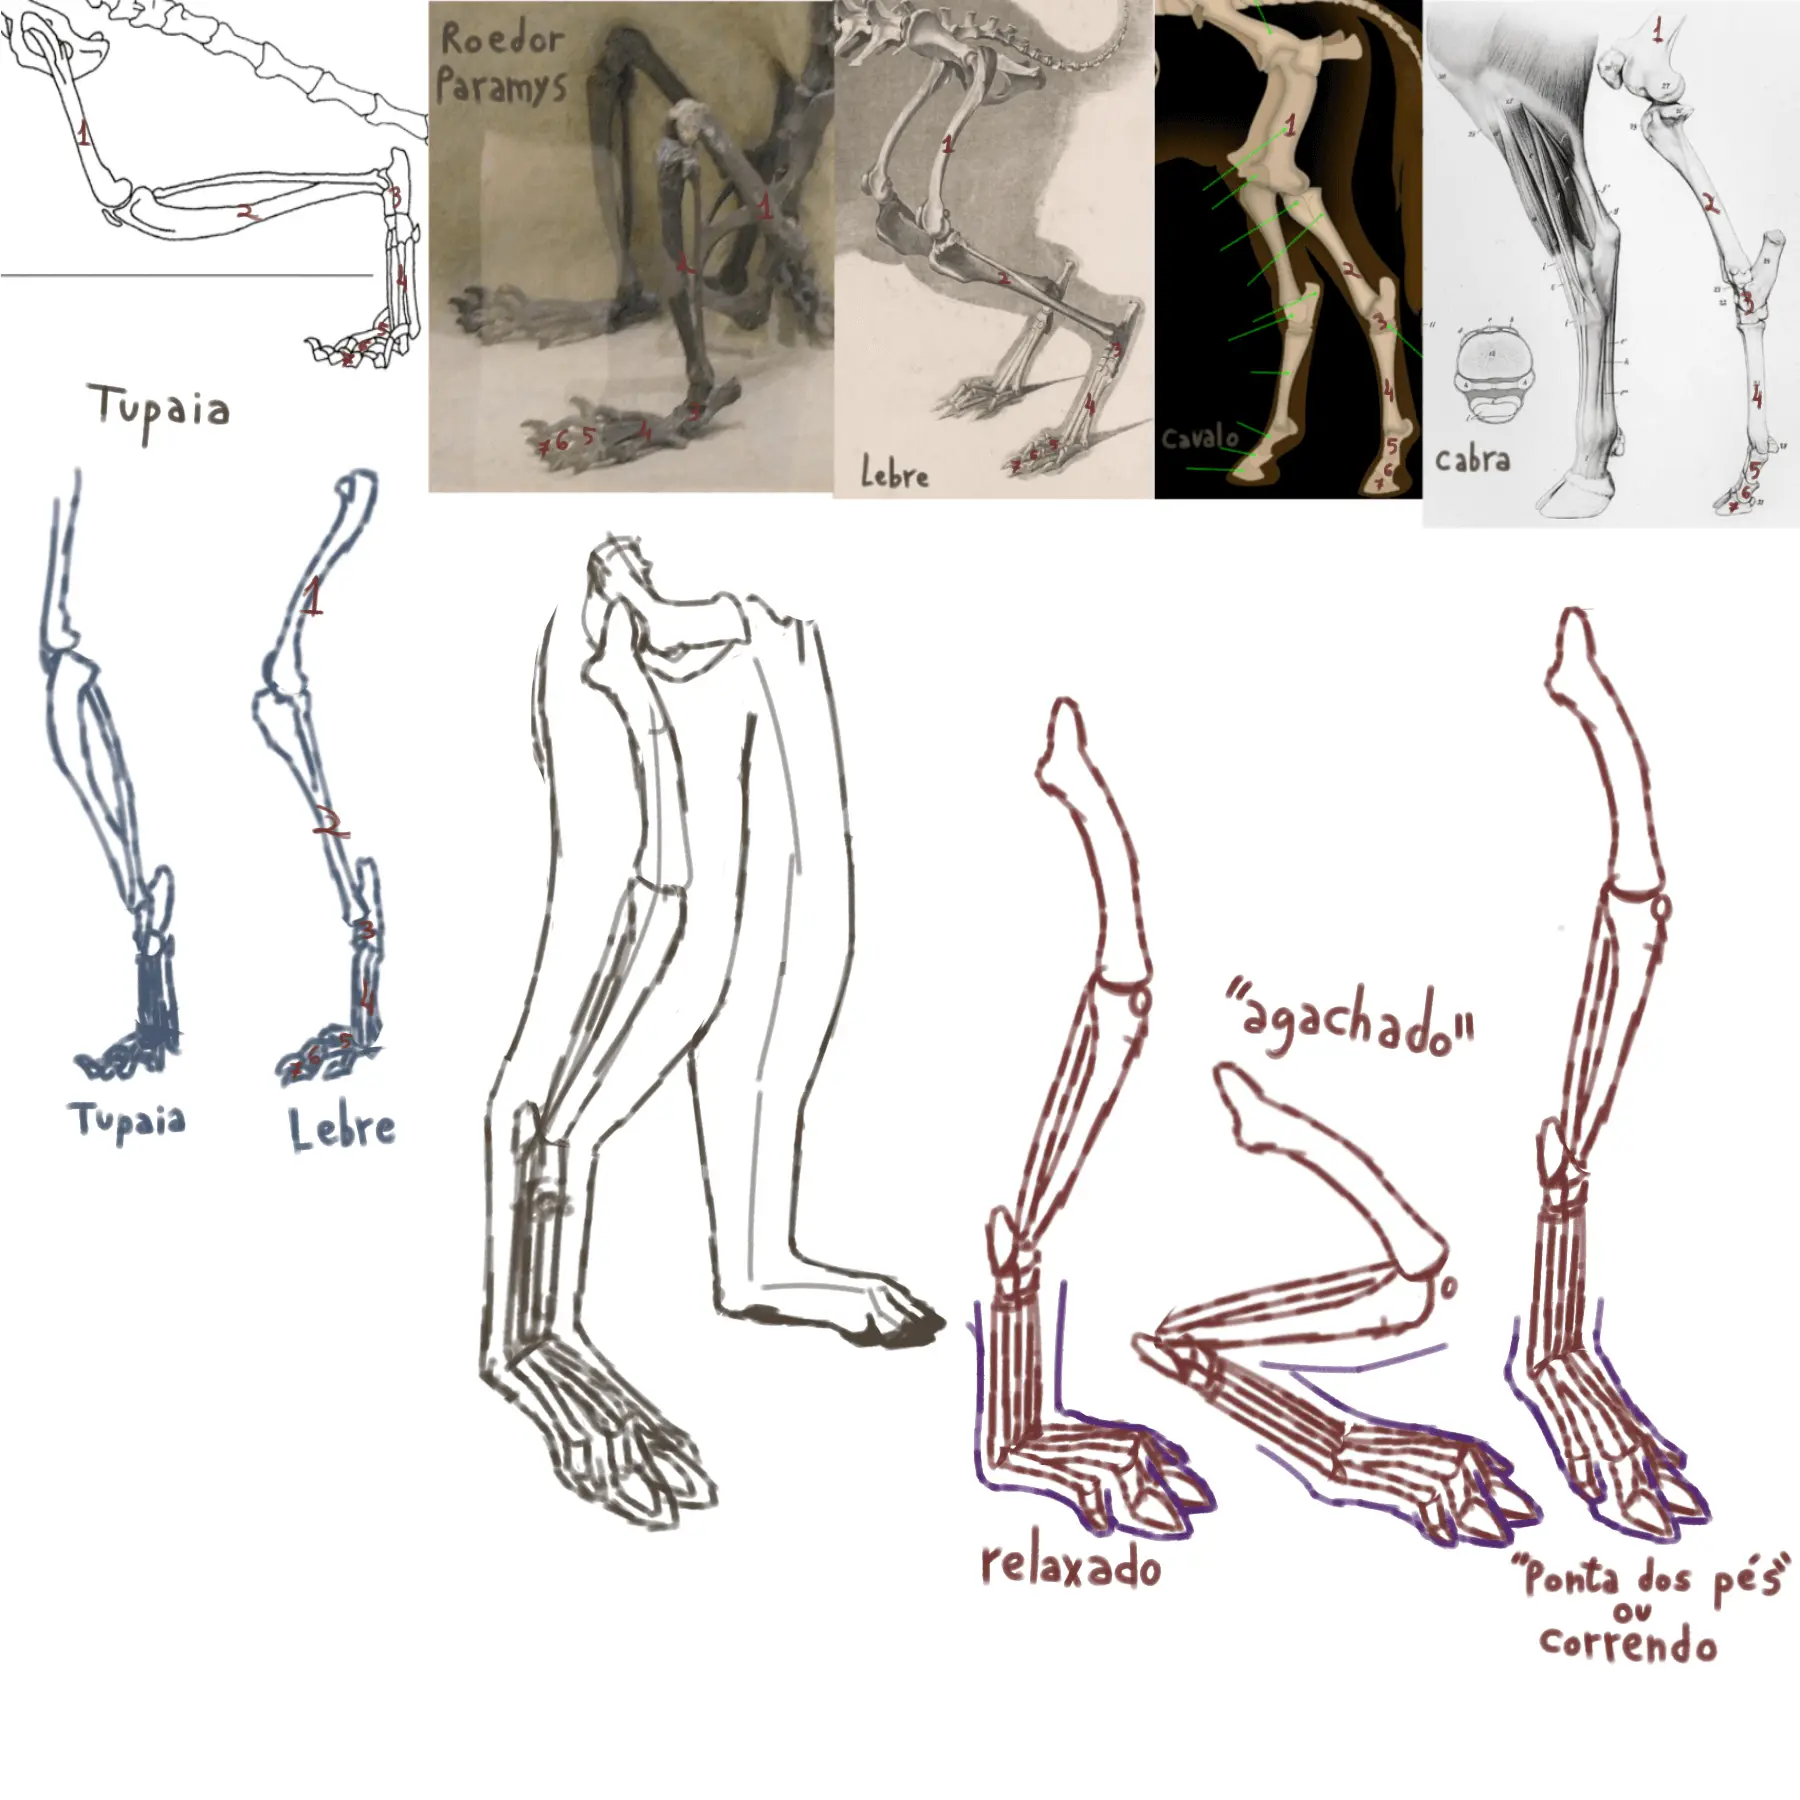 Several leg anatomy sketches of a made-up creature comparing to real-life animal legs.